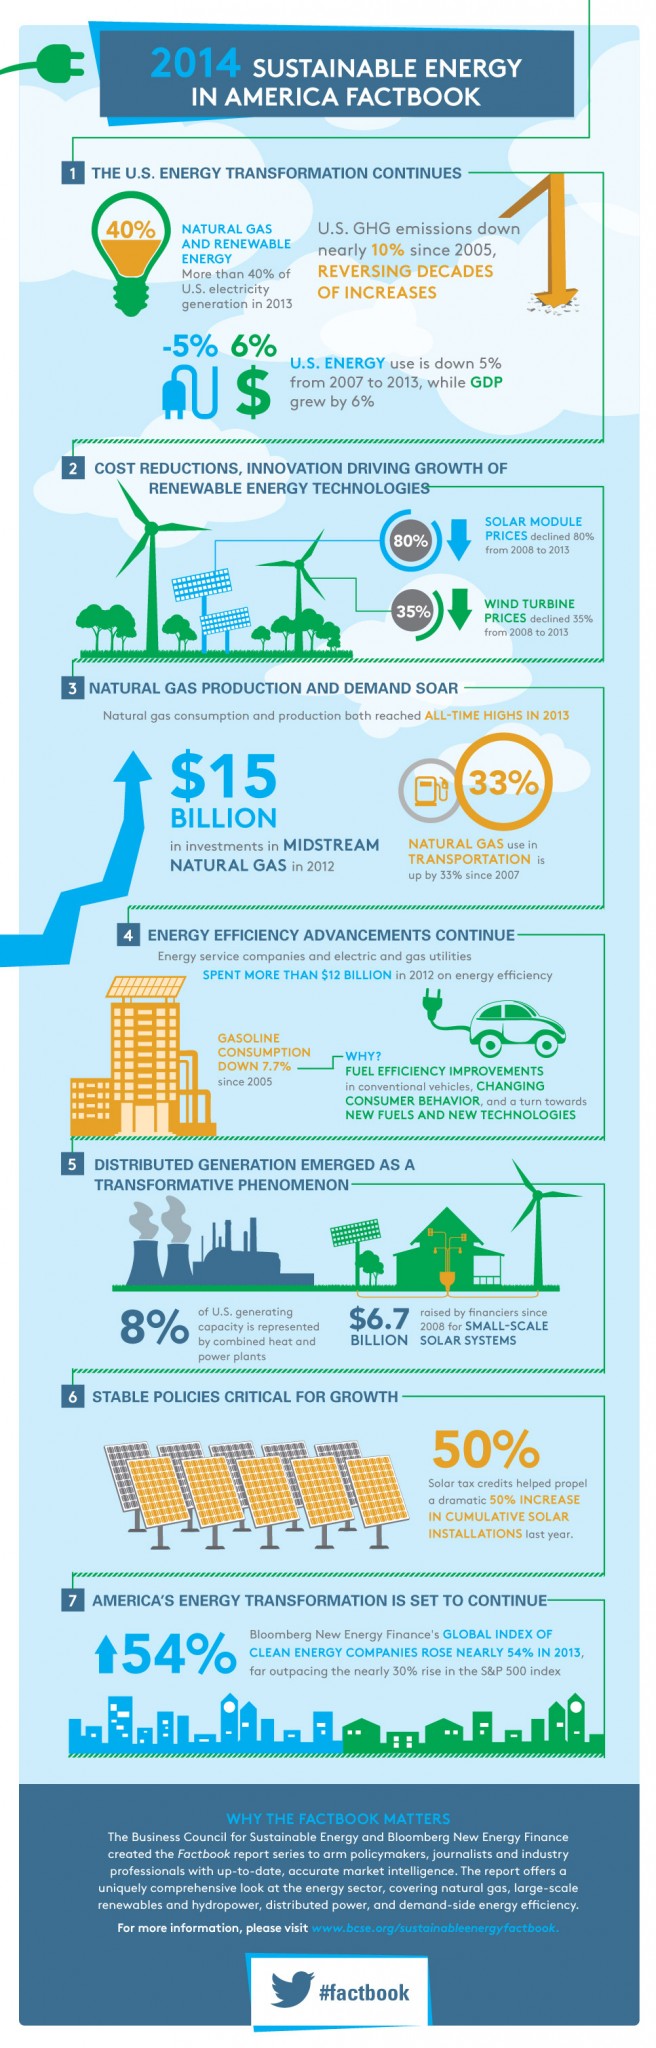 2014 Sustainable Energy In America Factbook | SIMCenter